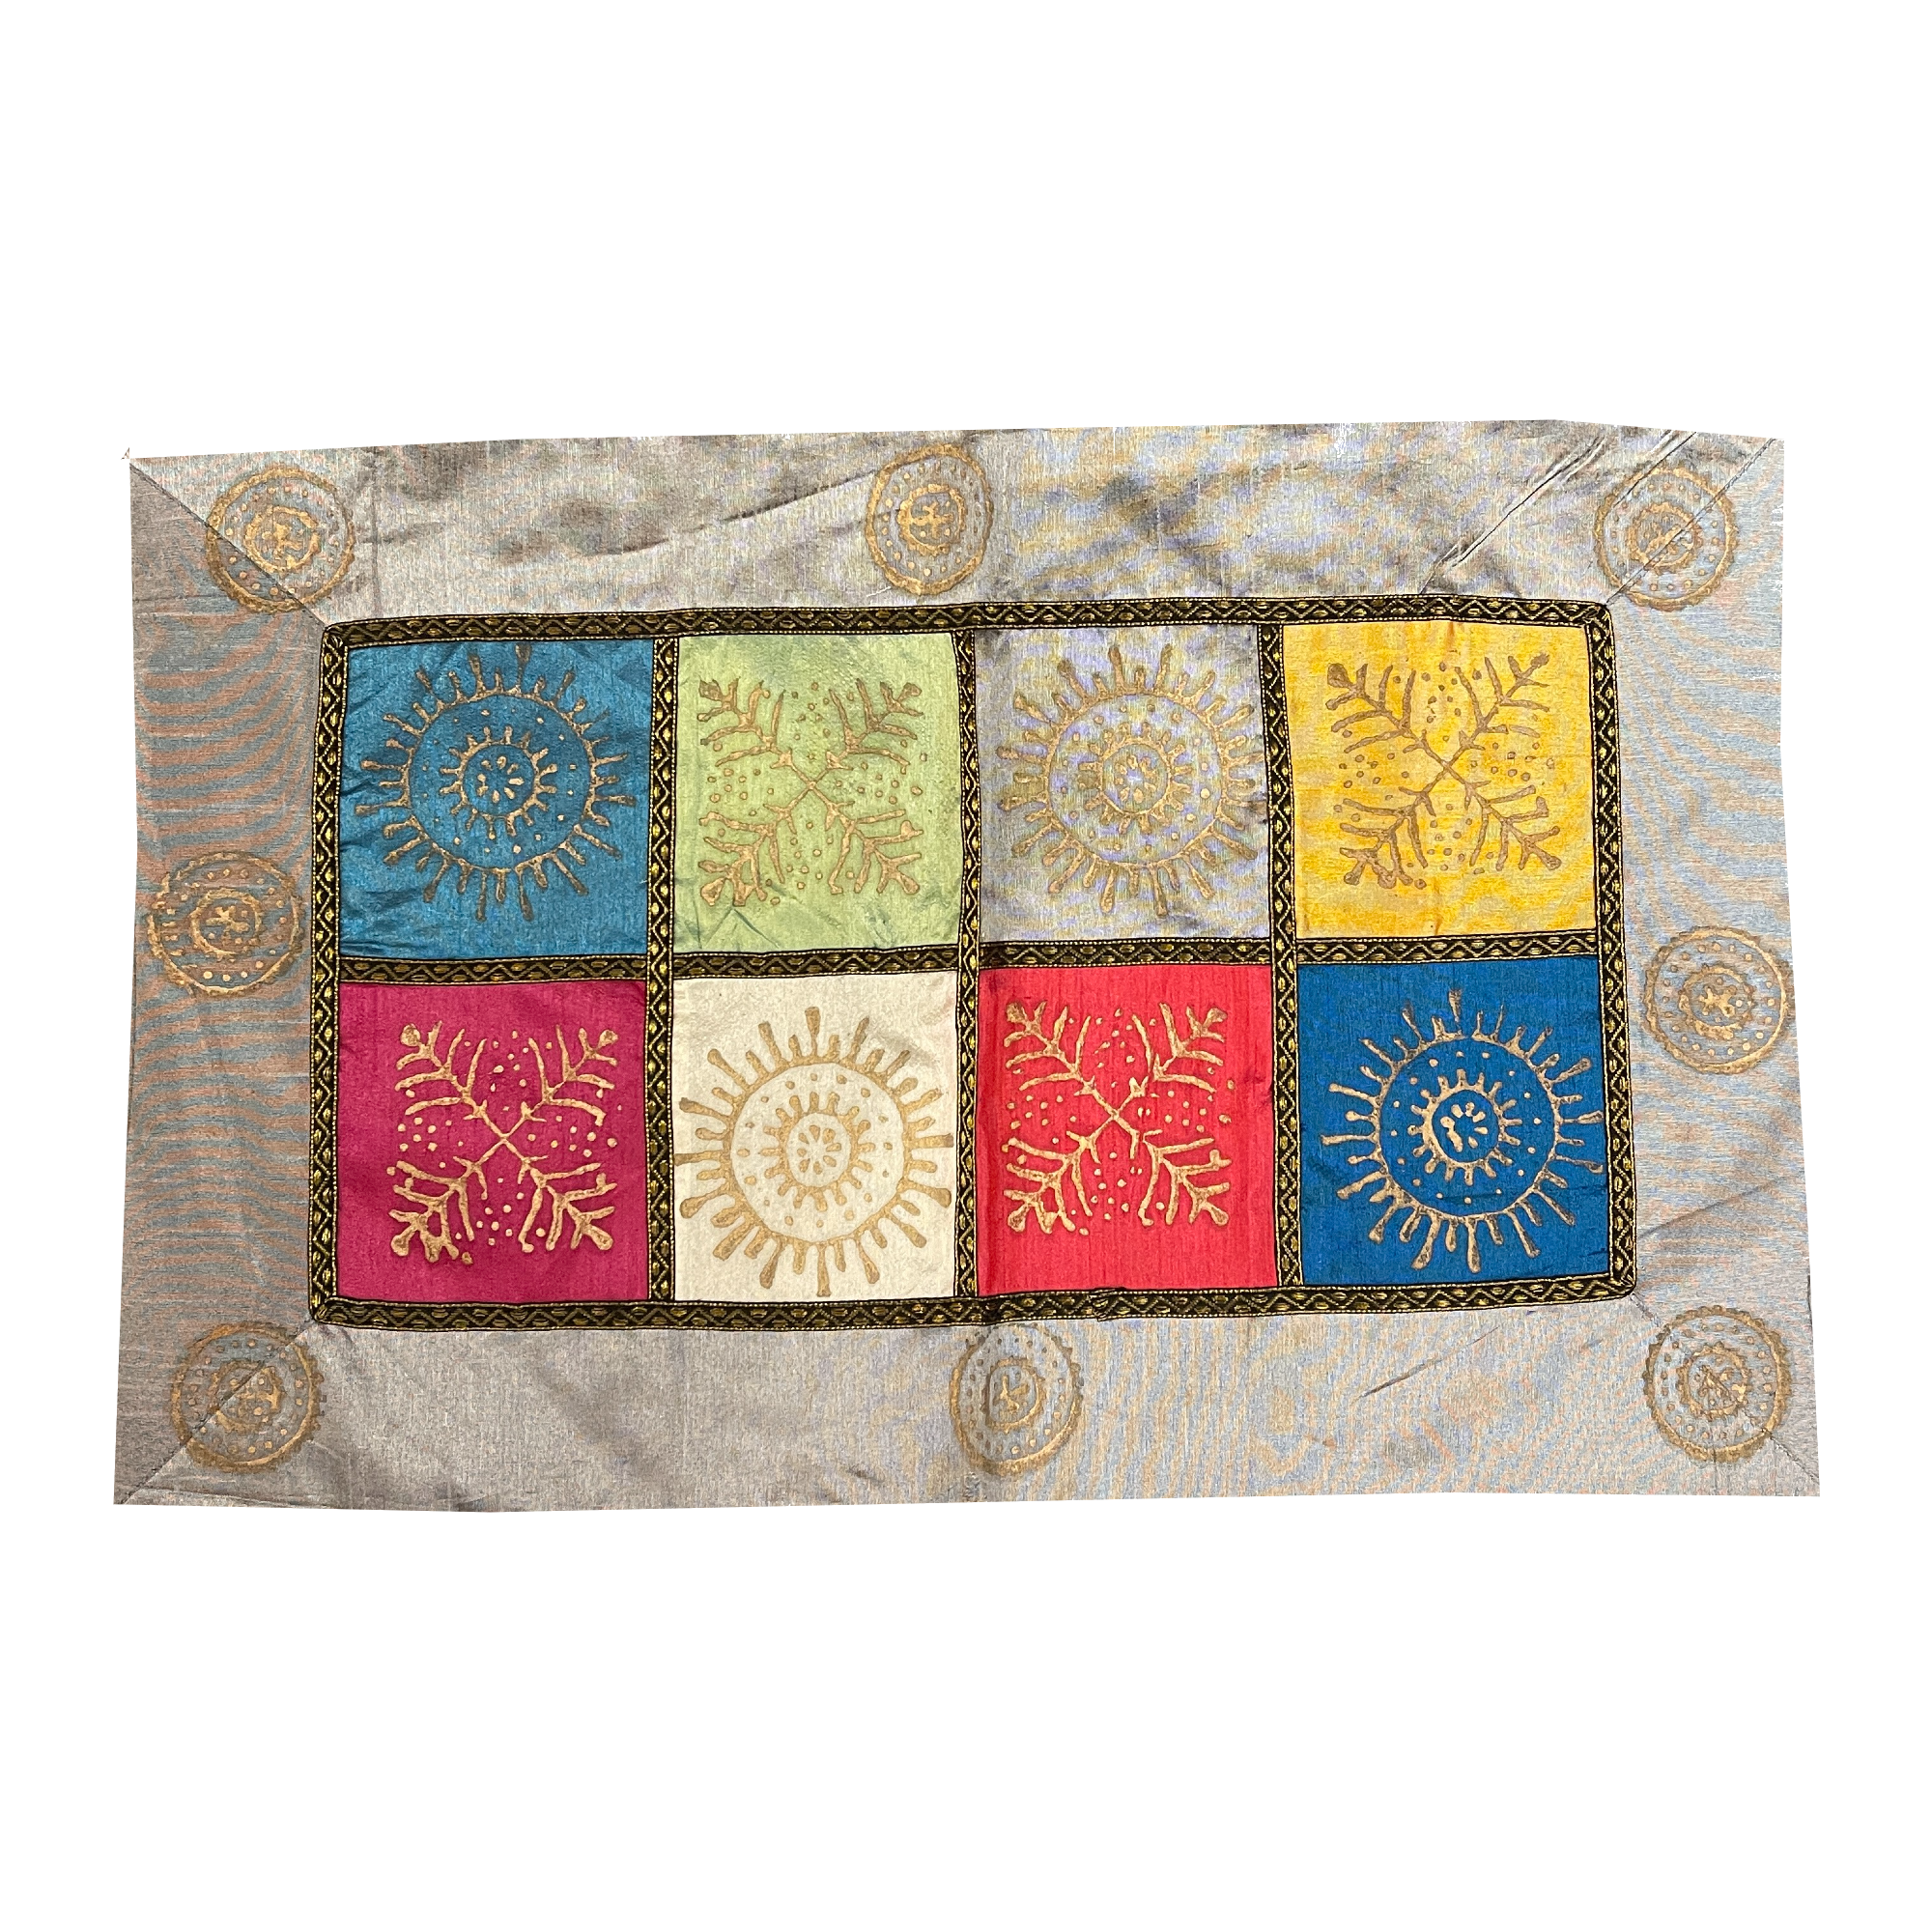 Silver Pillow Covers With Golden Block Prints - 4 Styles - Vintage India NYC